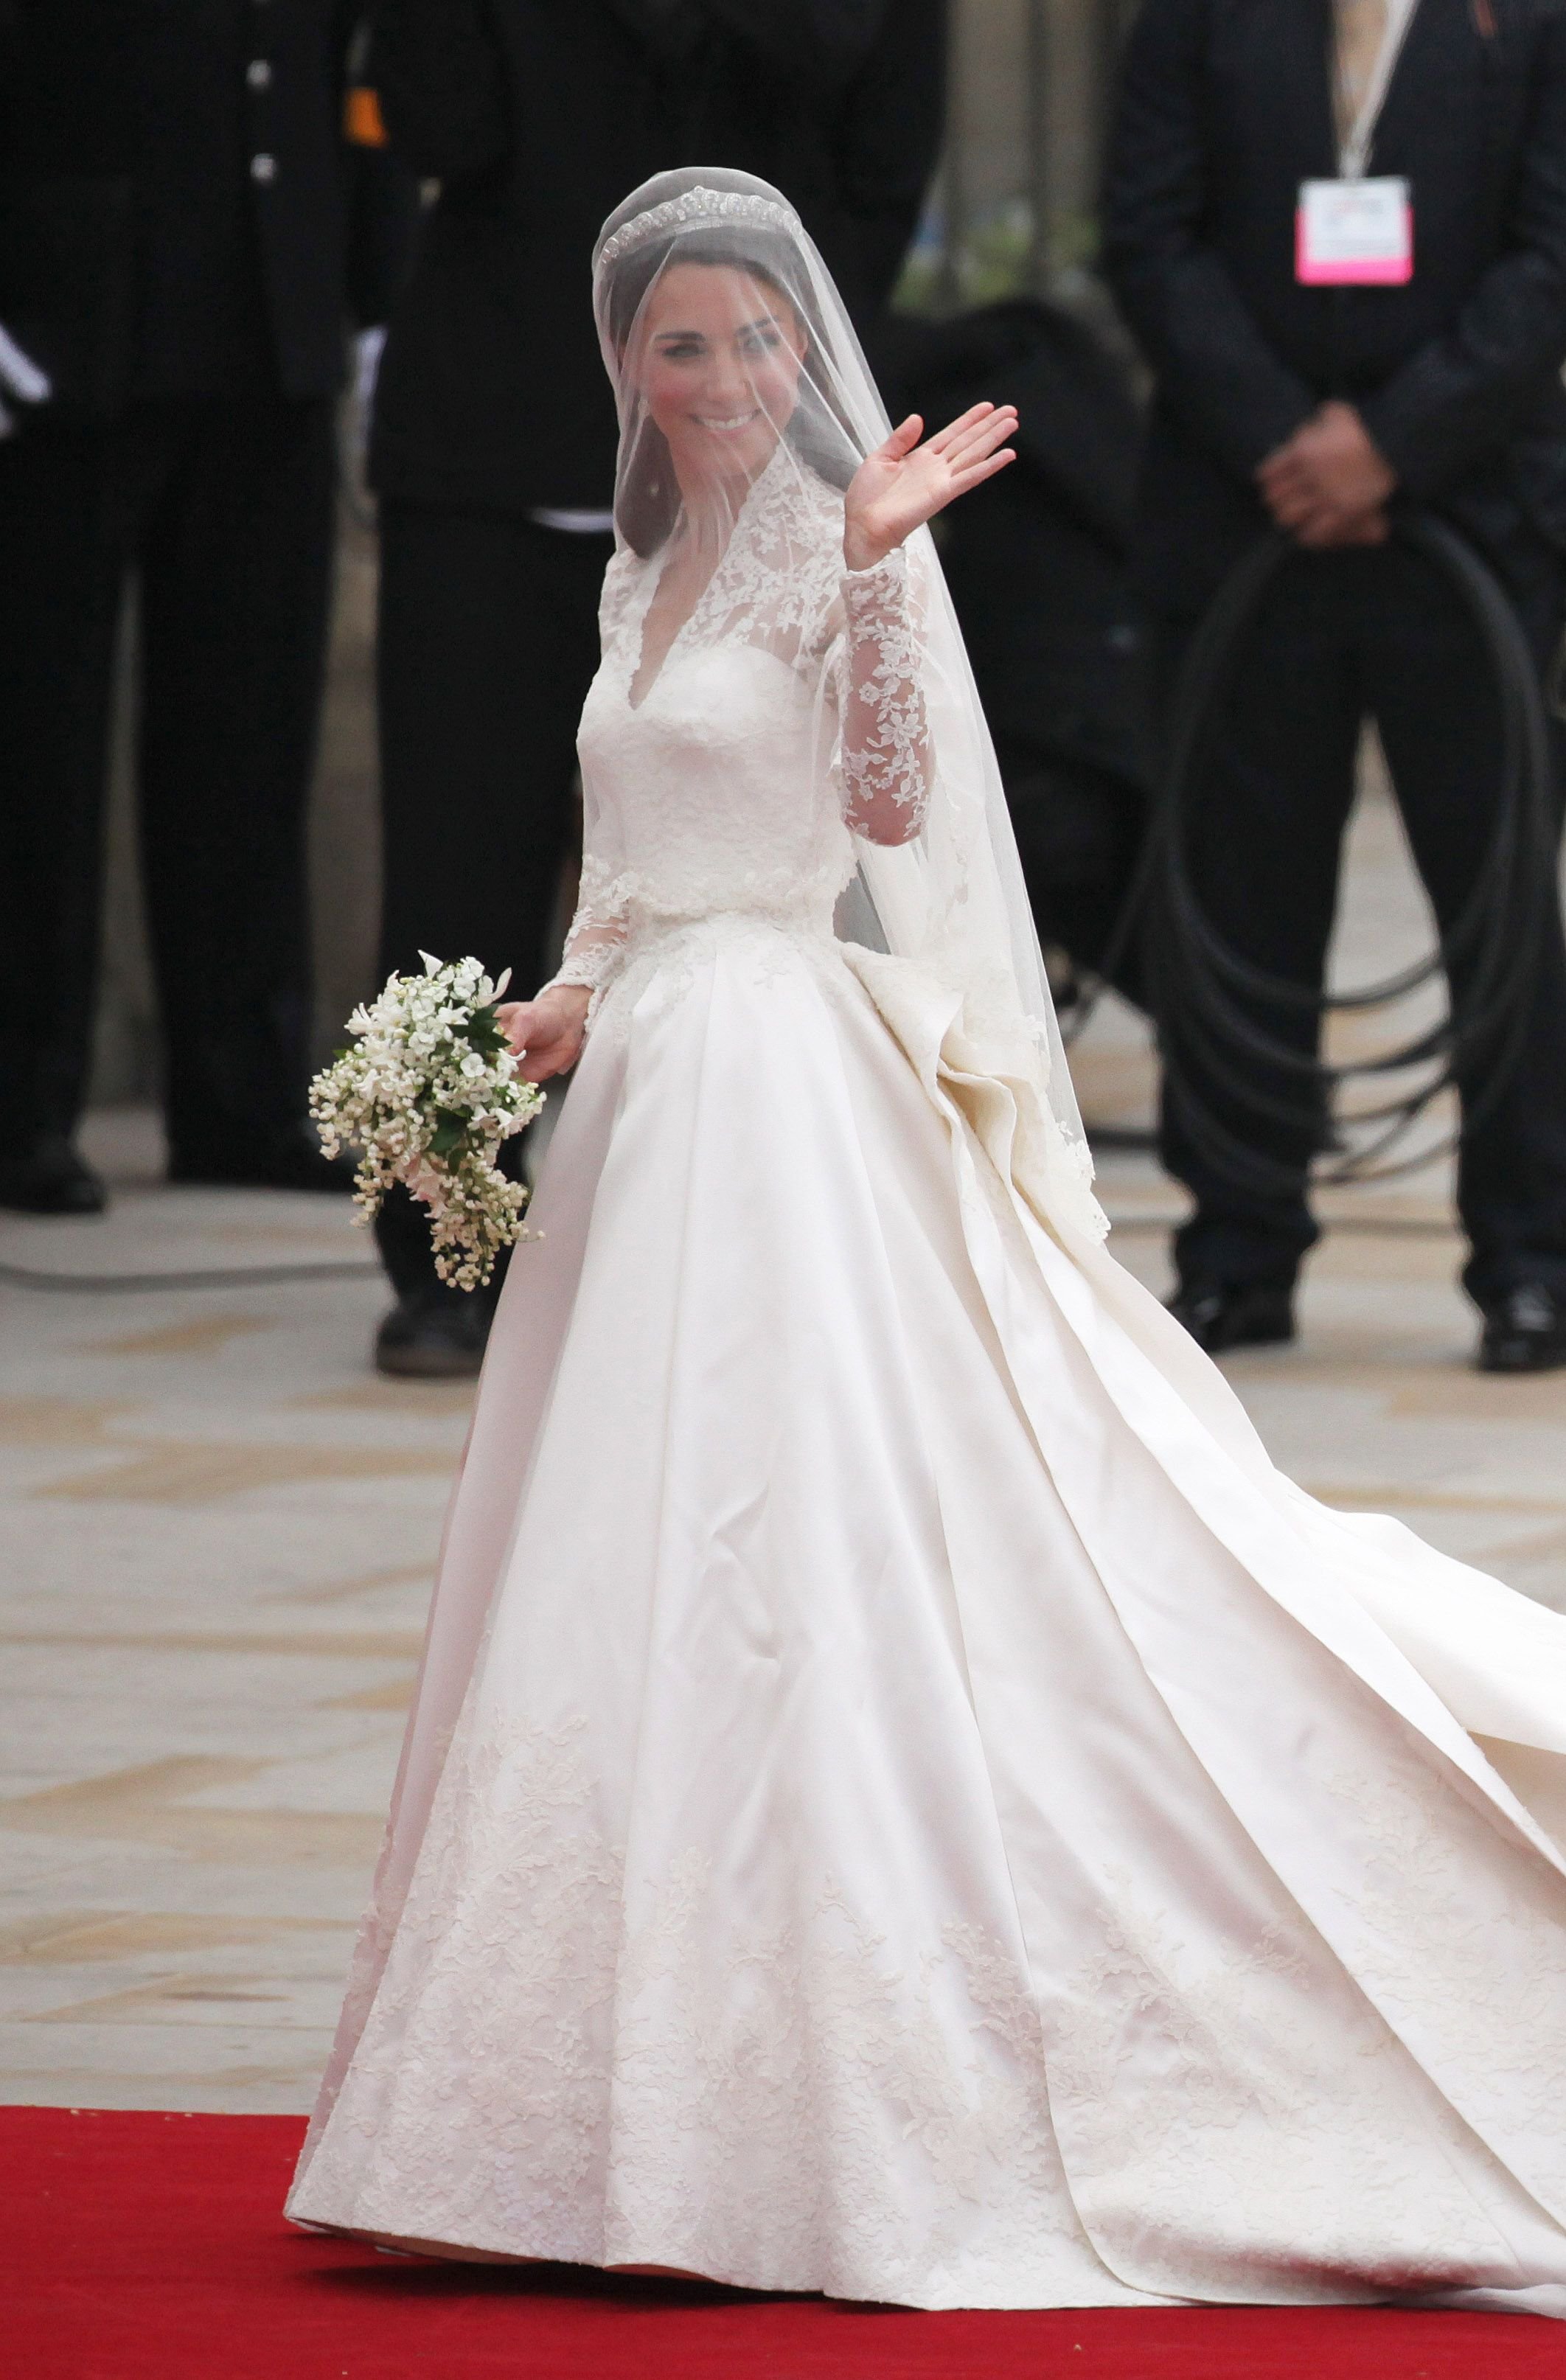 Catherine Middleton waves to the crowds as she arrives at Westminster Abbey on April 29, 2011, in London, England | Photo: Paul Rogers - WPA Pool/Getty Images